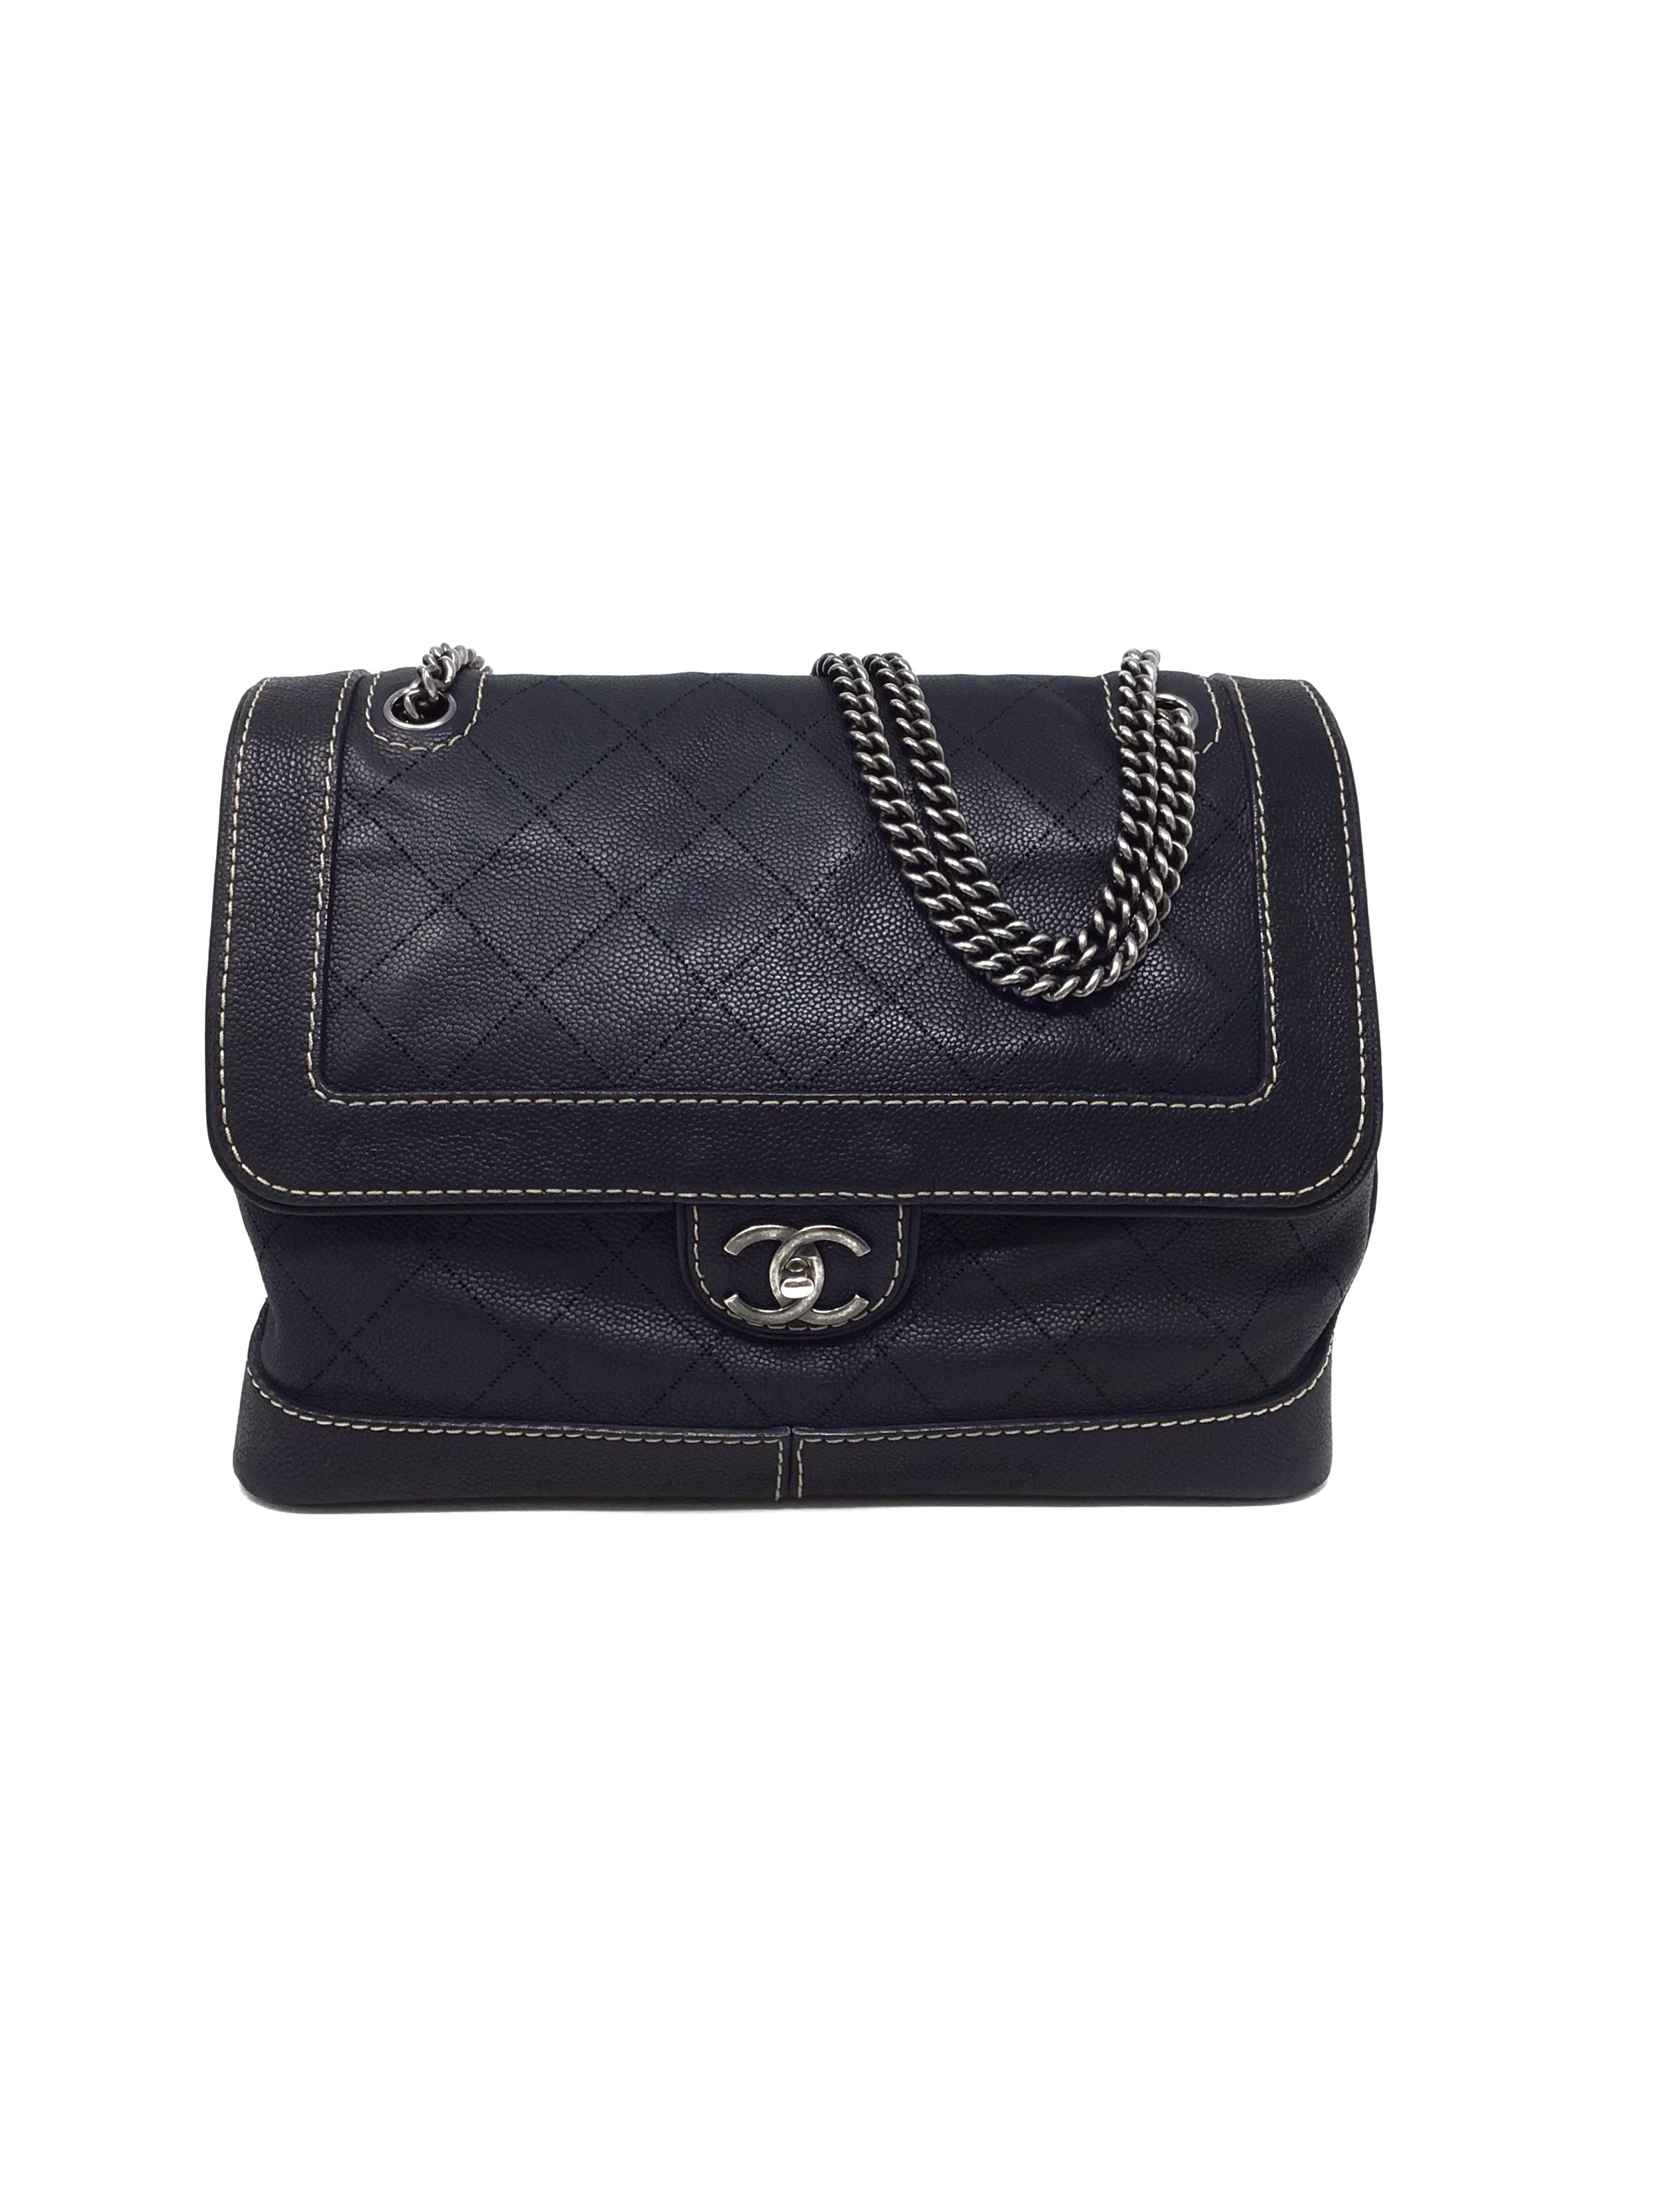 Chanel Navy '12 Caviar Perforated Contrast Stitch Flap Bag – The